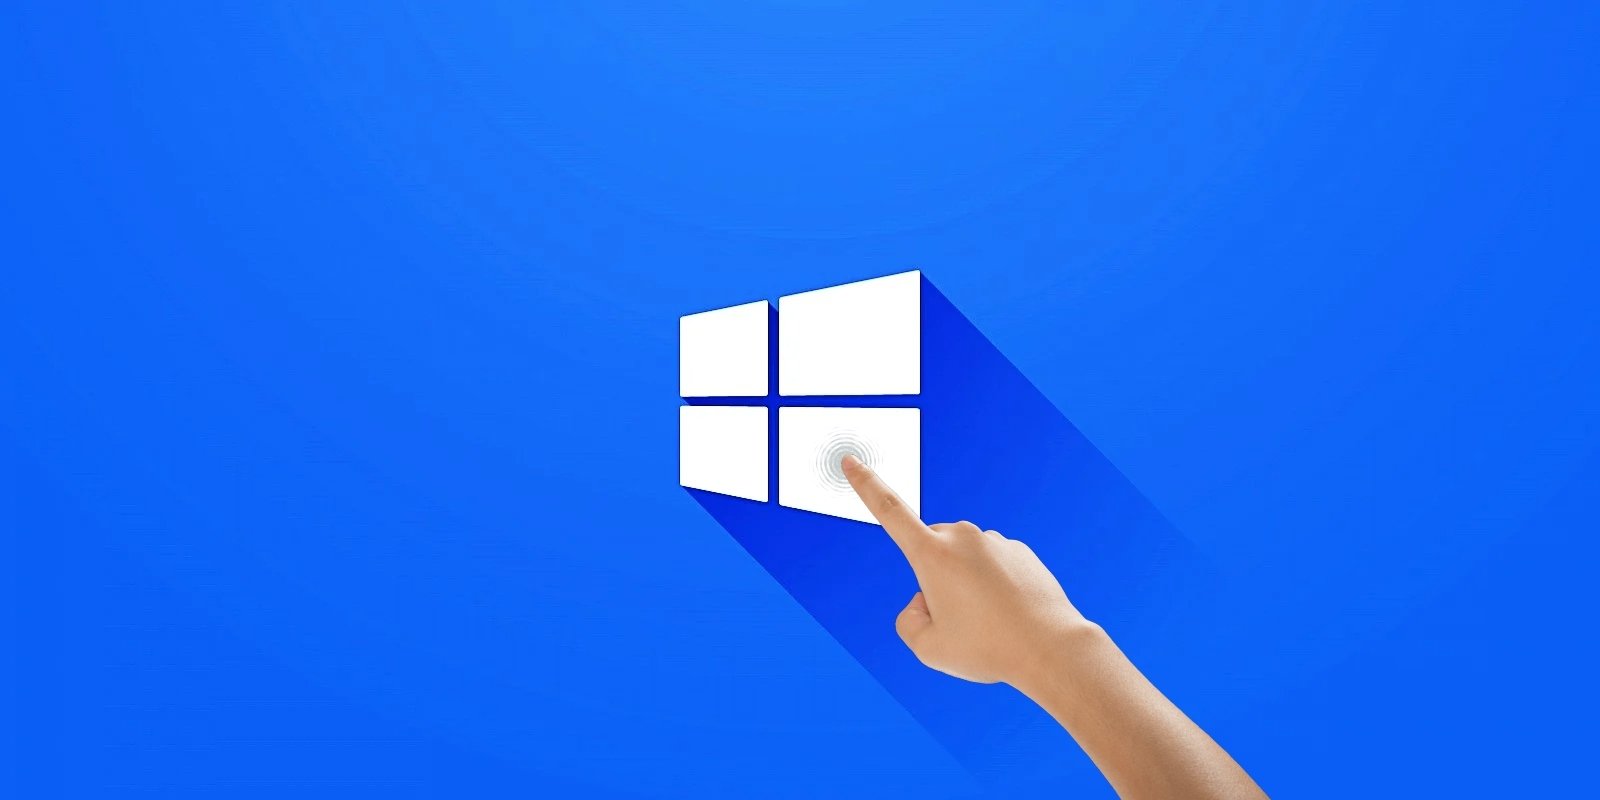 windows-finger-command-abused-by-phishing-to-download-malware